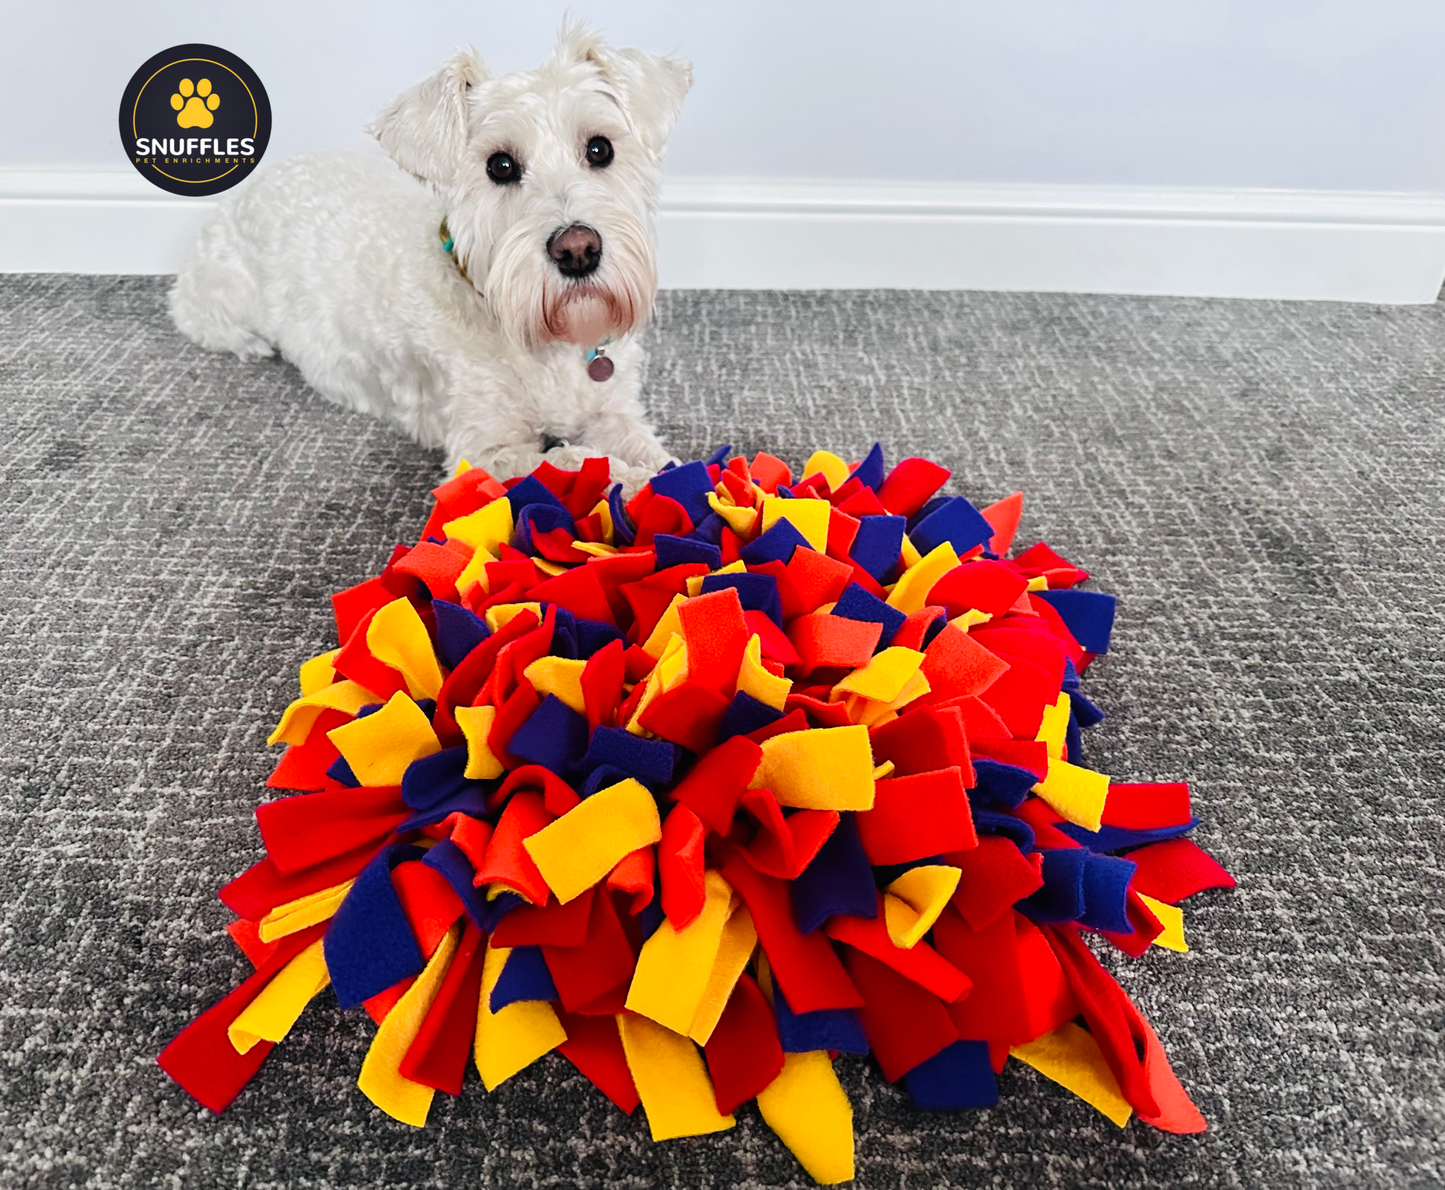 Medium Multicoloured Snuffle Mat For Dogs And Small Pets, 4 Colour Options Available